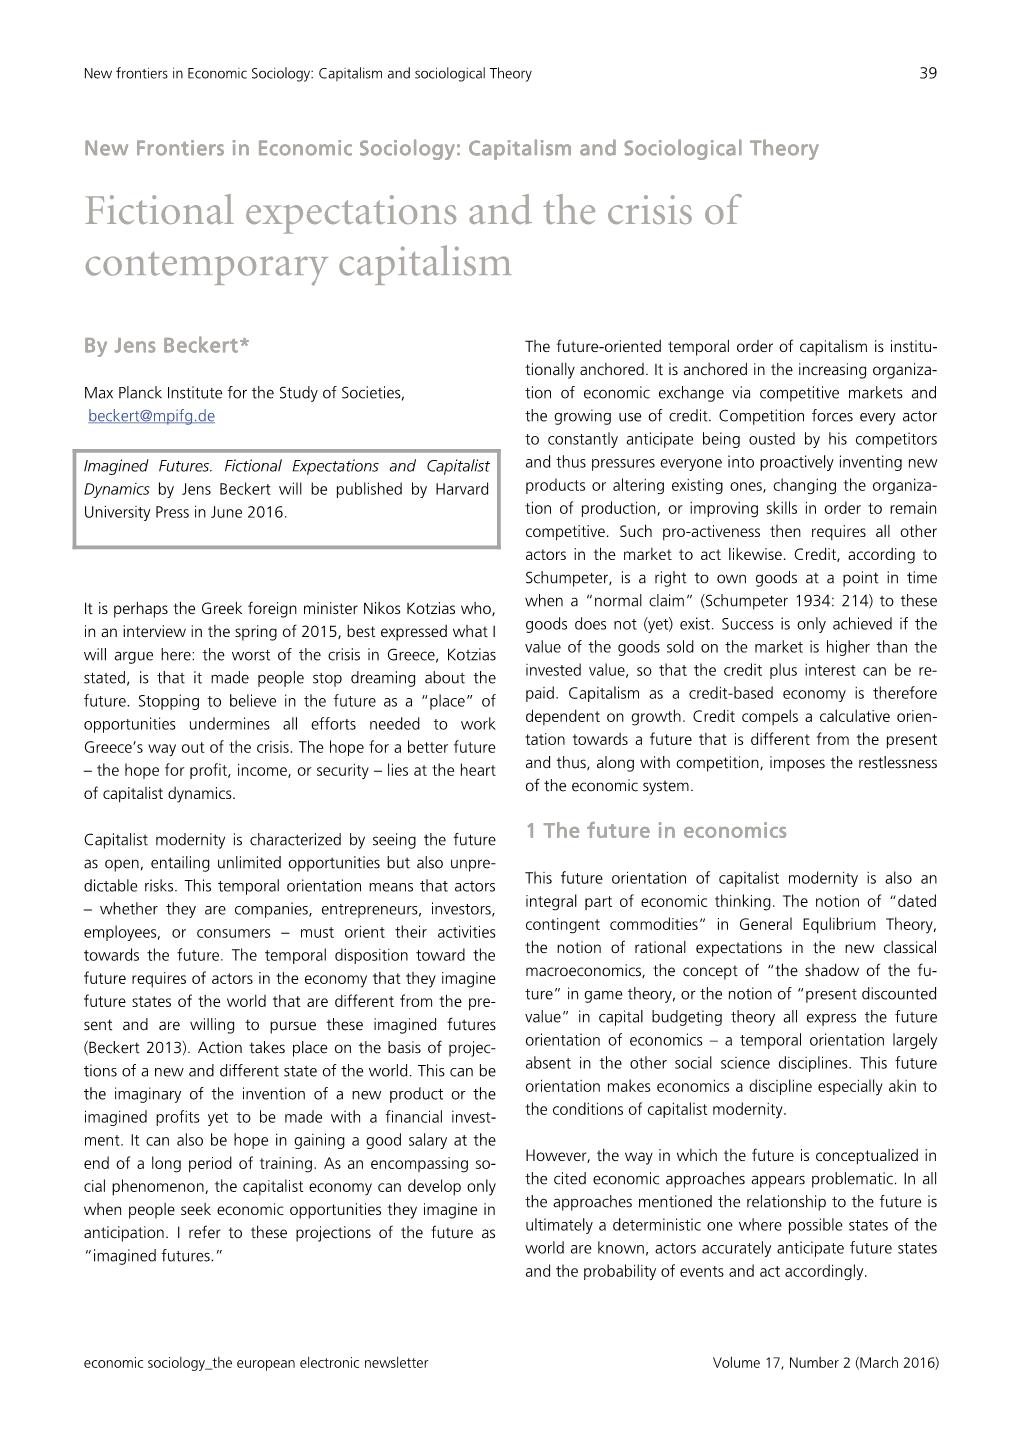 Fictional Expectations and the Crisis of Contemporary Capitalism